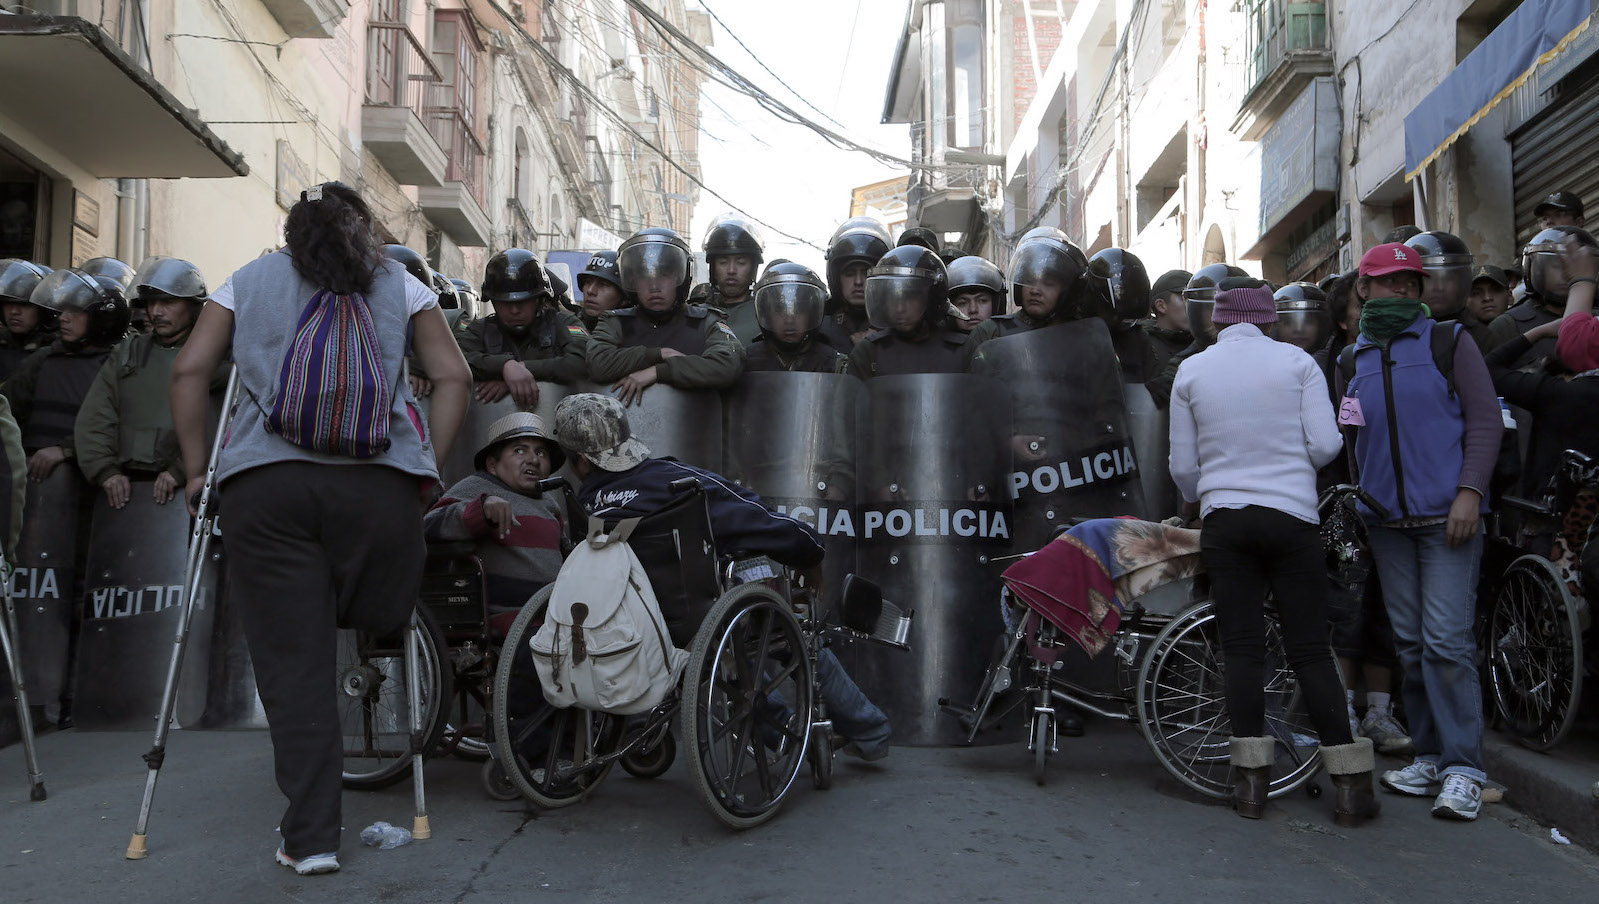 A group of disabled protestors in wheelchairs and one woman with crutches stands in front of a phalanx of police in riot gear and shields